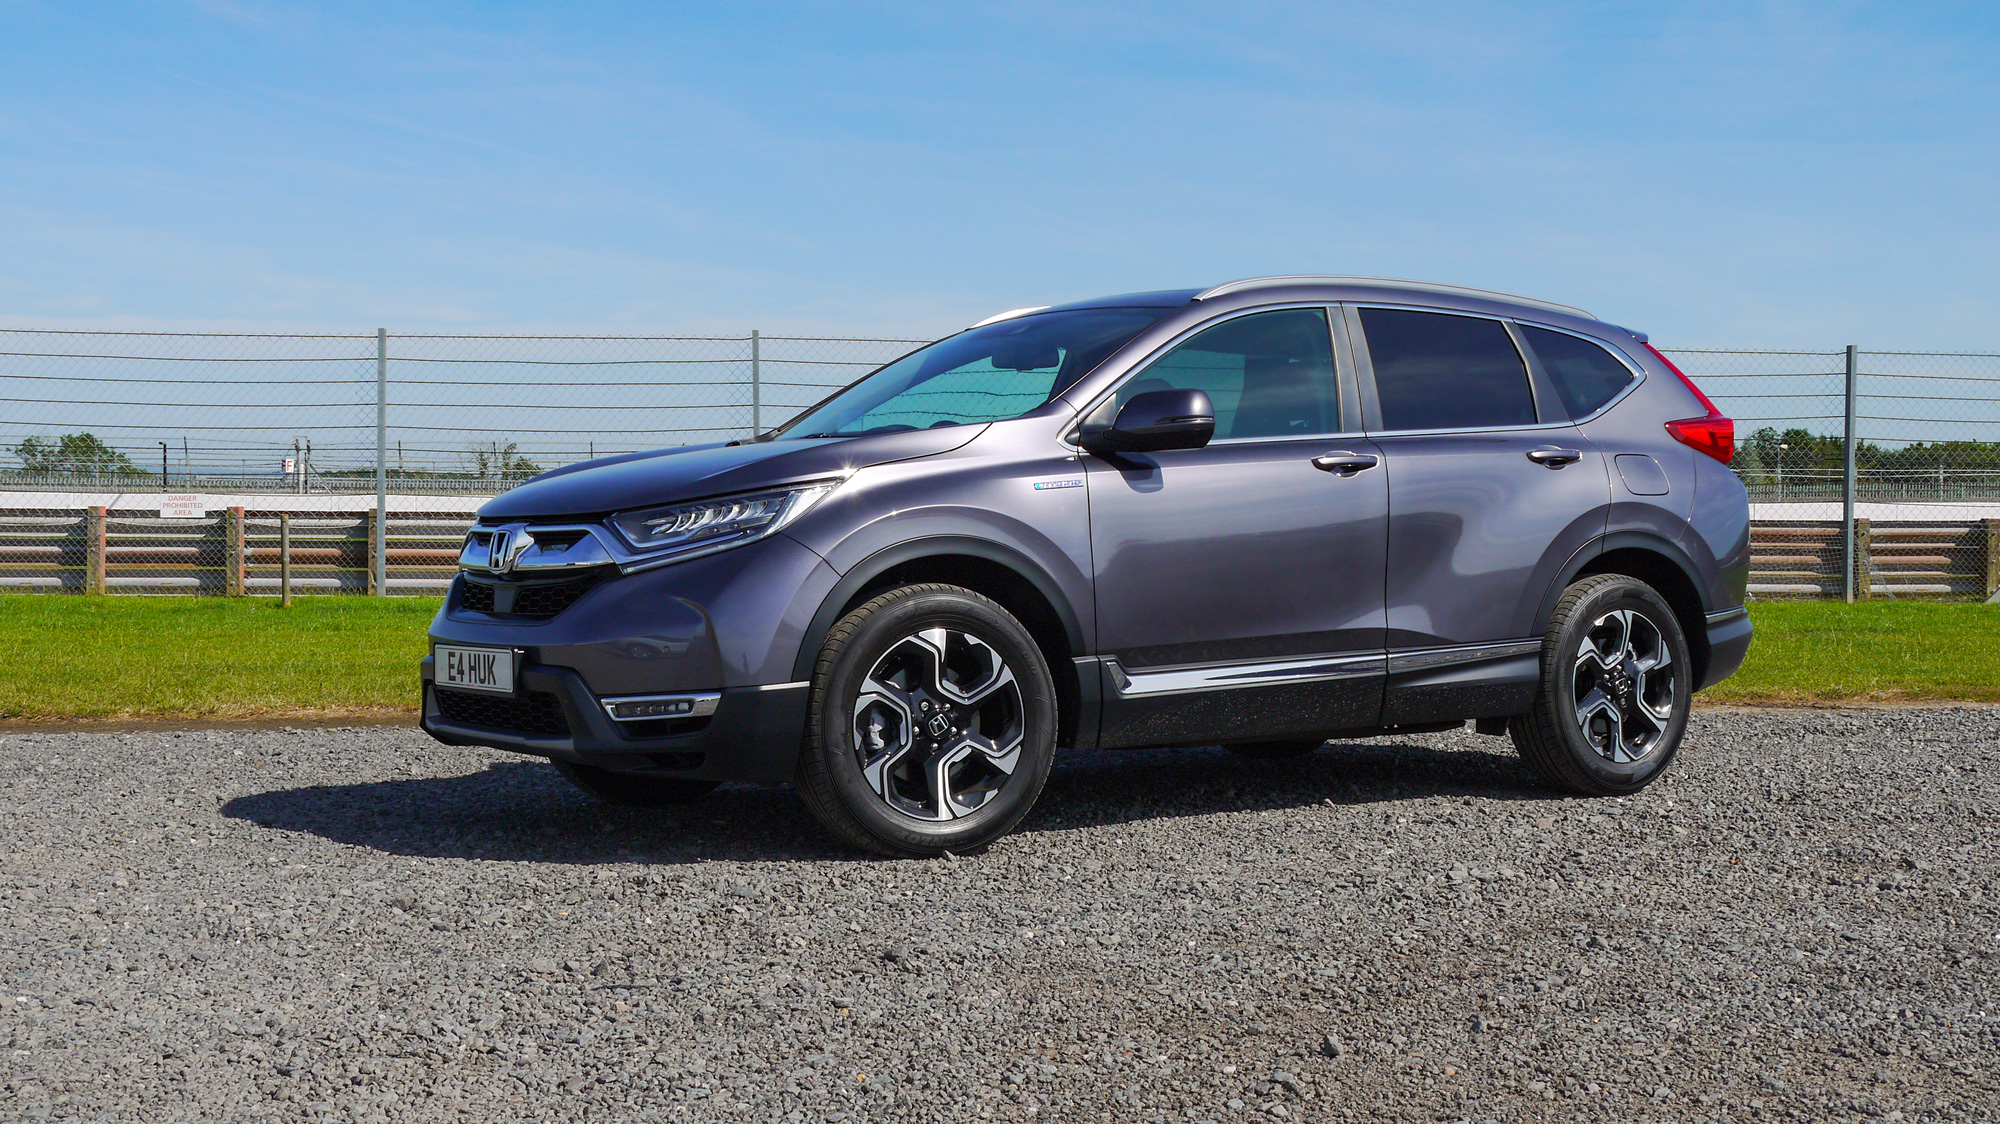 Honda CR-V 2019: Plenty of Tech and Oodles of Space 3